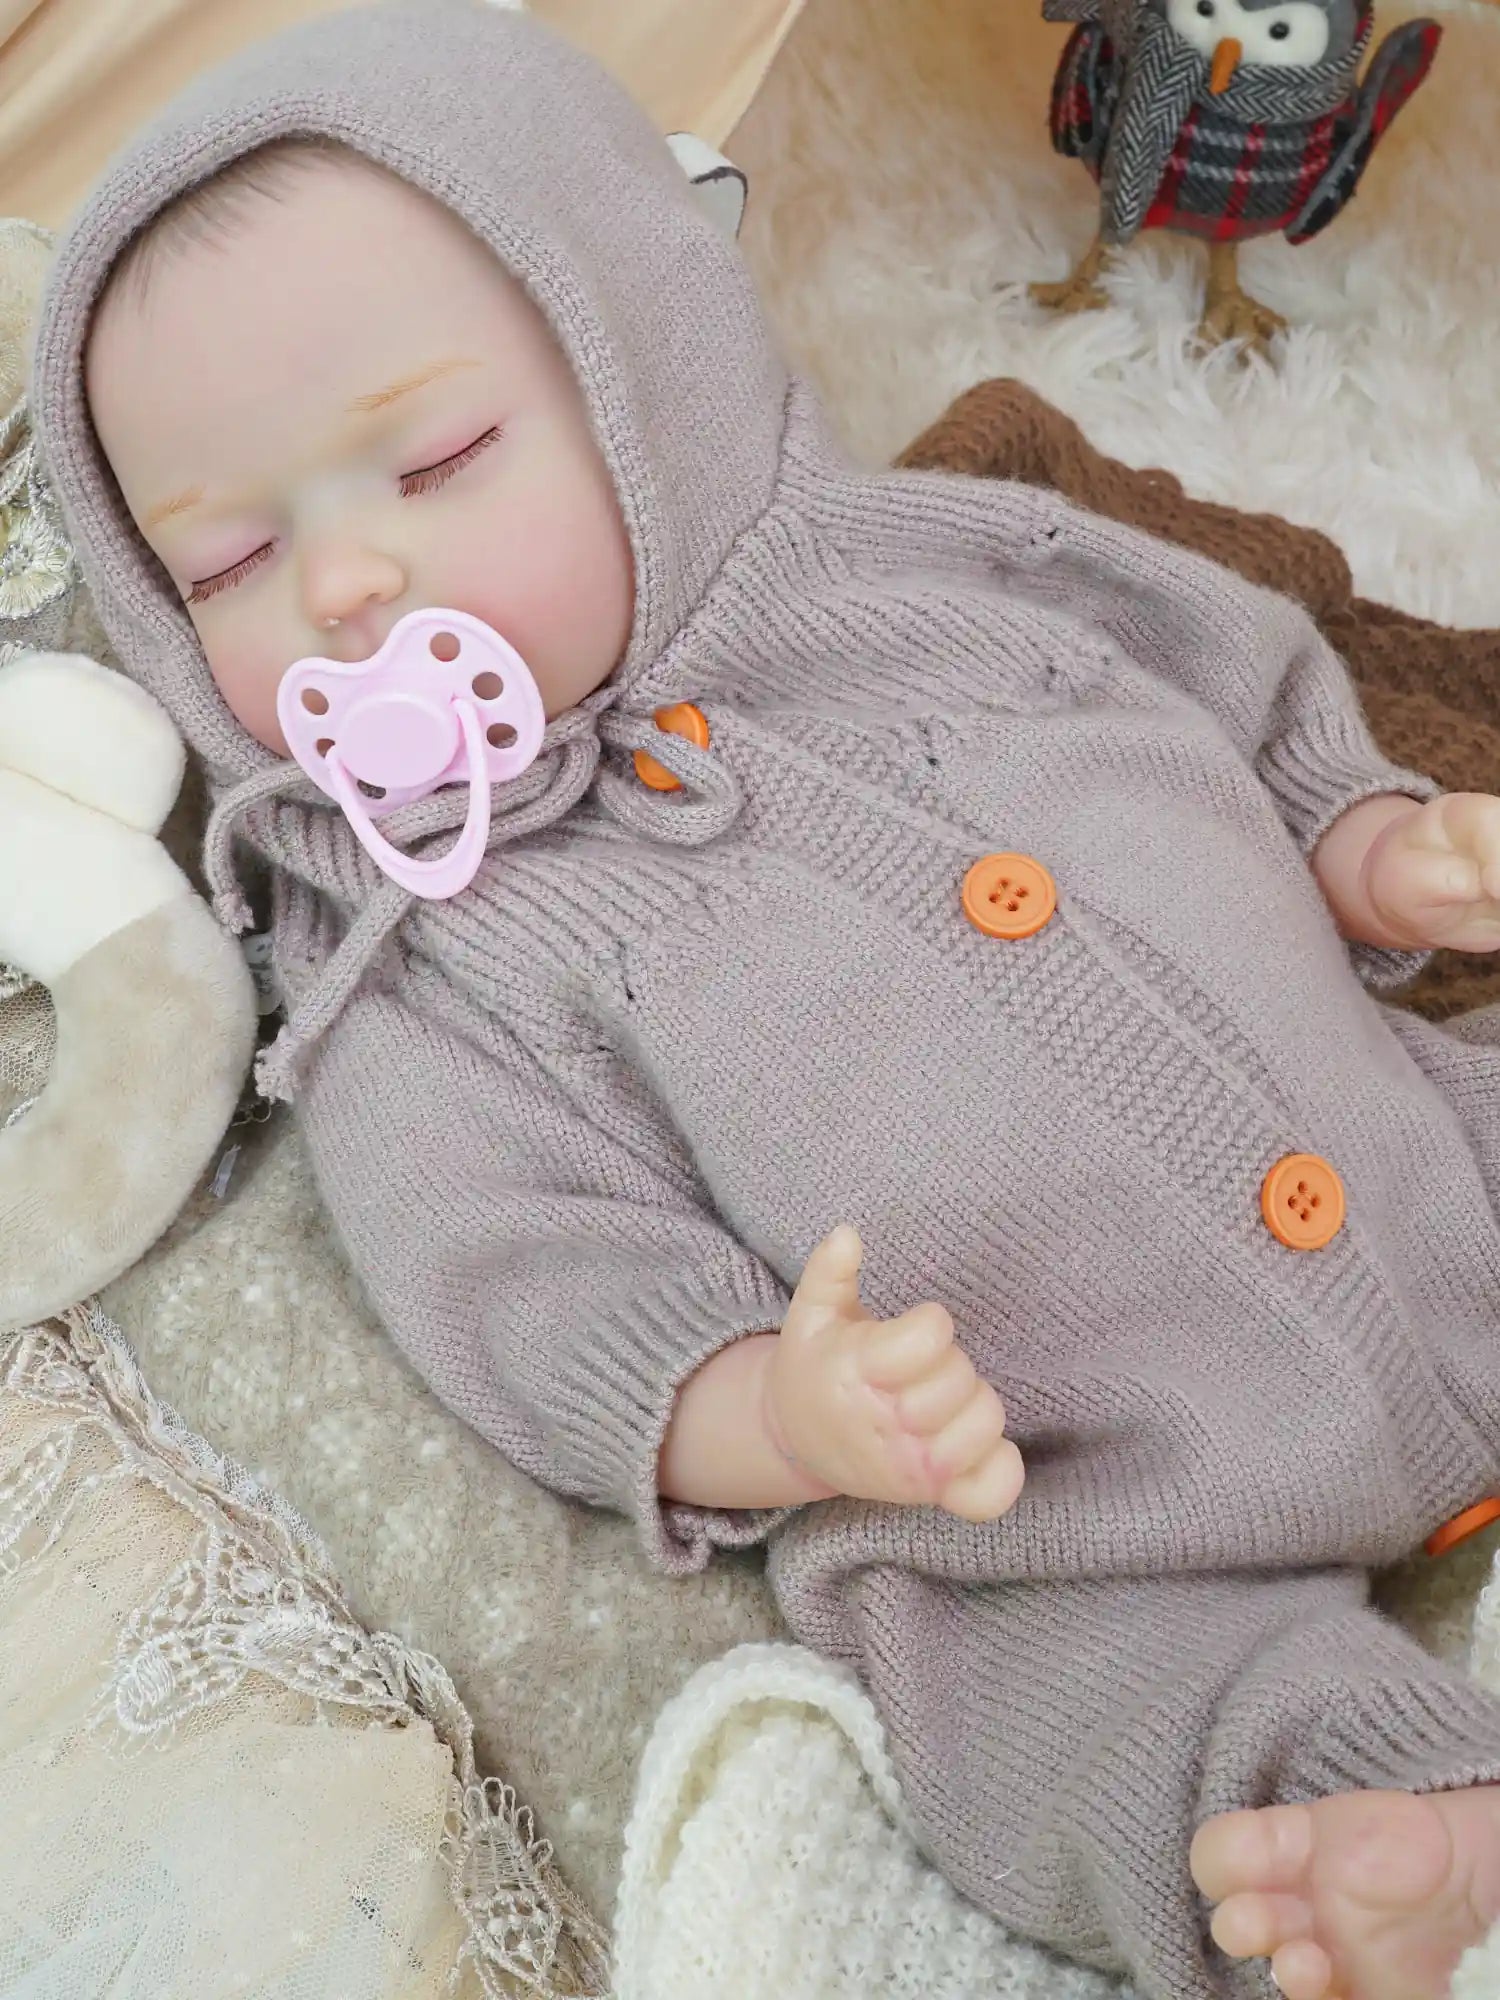 A close-up of a reborn doll toy in a cozy lilac knitted outfit with a hood, pacifier in mouth, lying on a plush white surface surrounded by soft toys